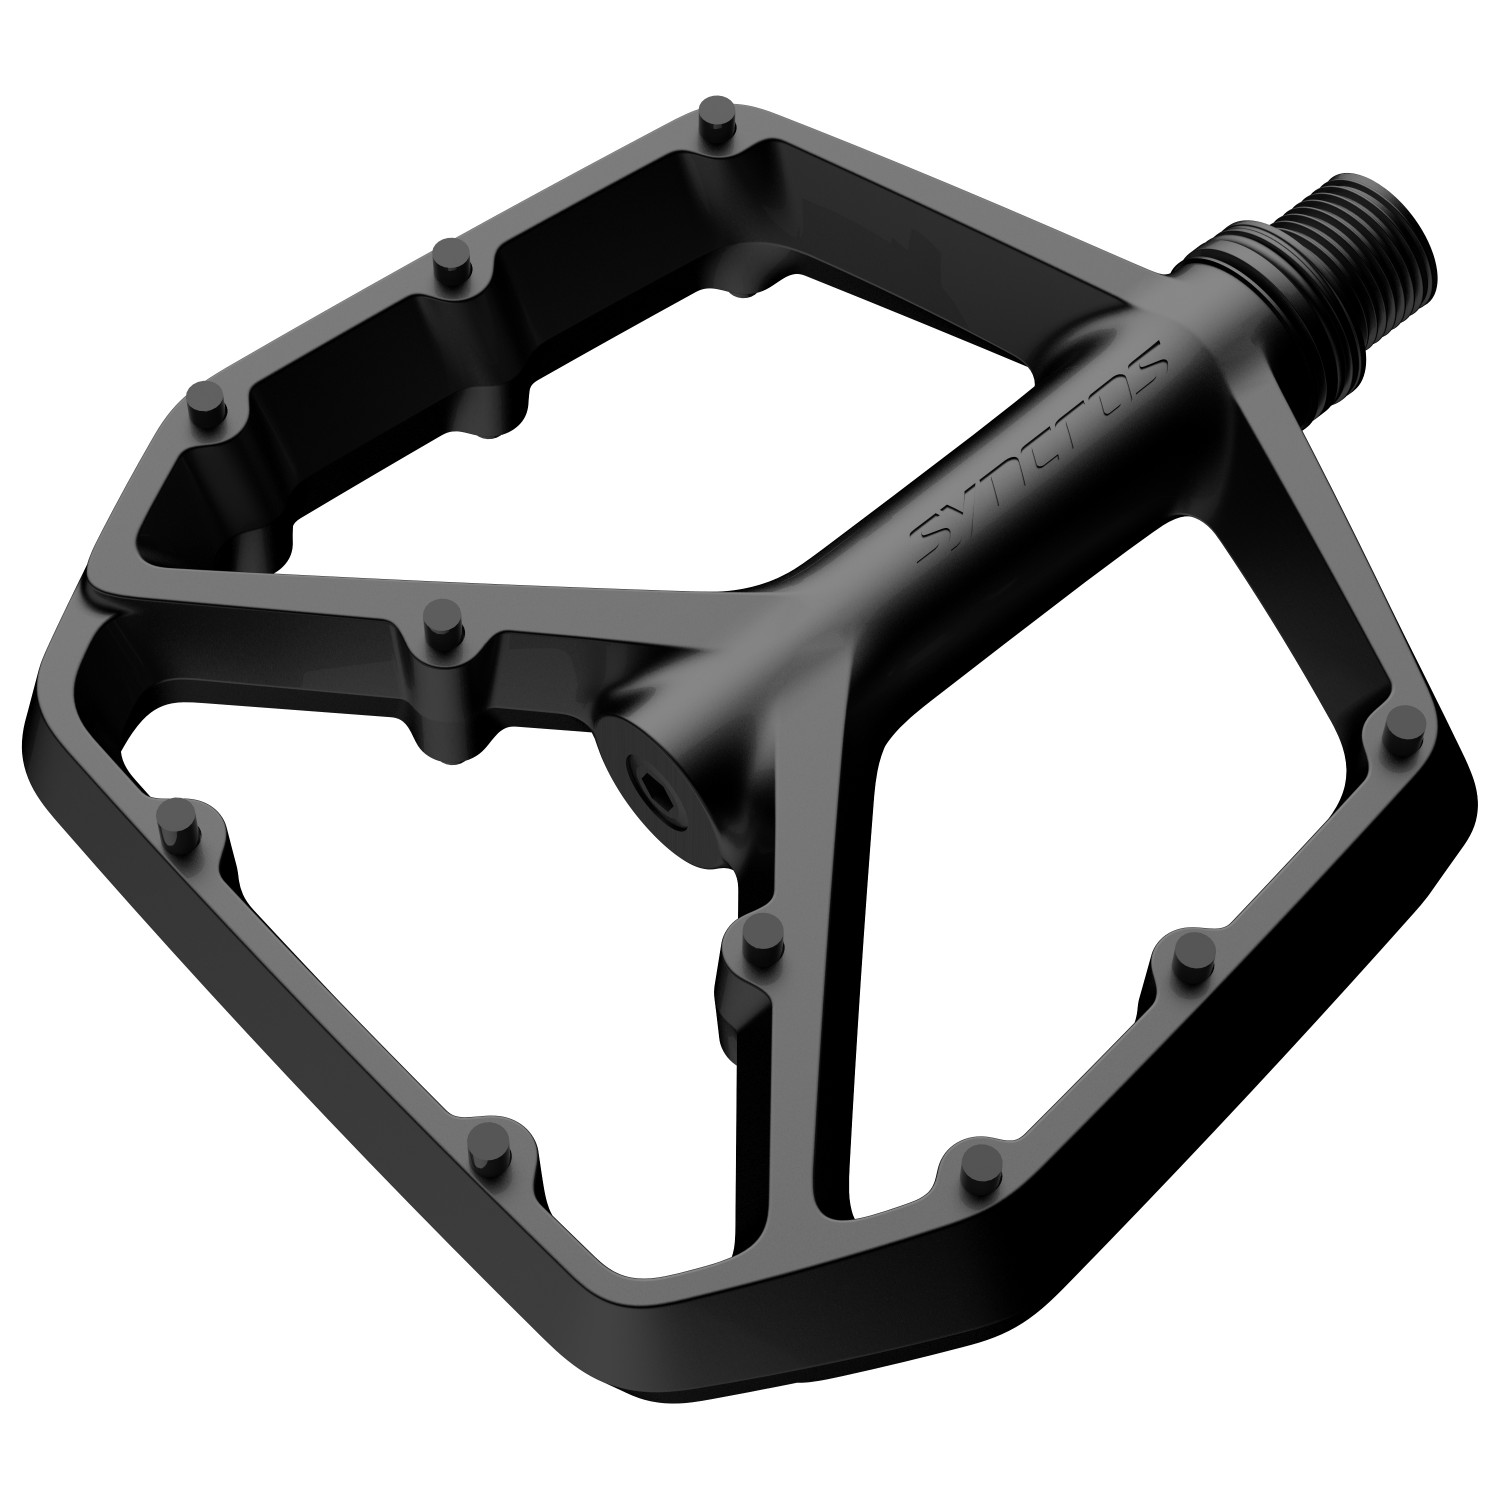 Педали платформы Syncros Flat Pedals Squamish II, черный 105 pd r7000 pd5800 r540 r550 road bike pedals carbon self locking pedals spd pedals with sm sh11 cleats